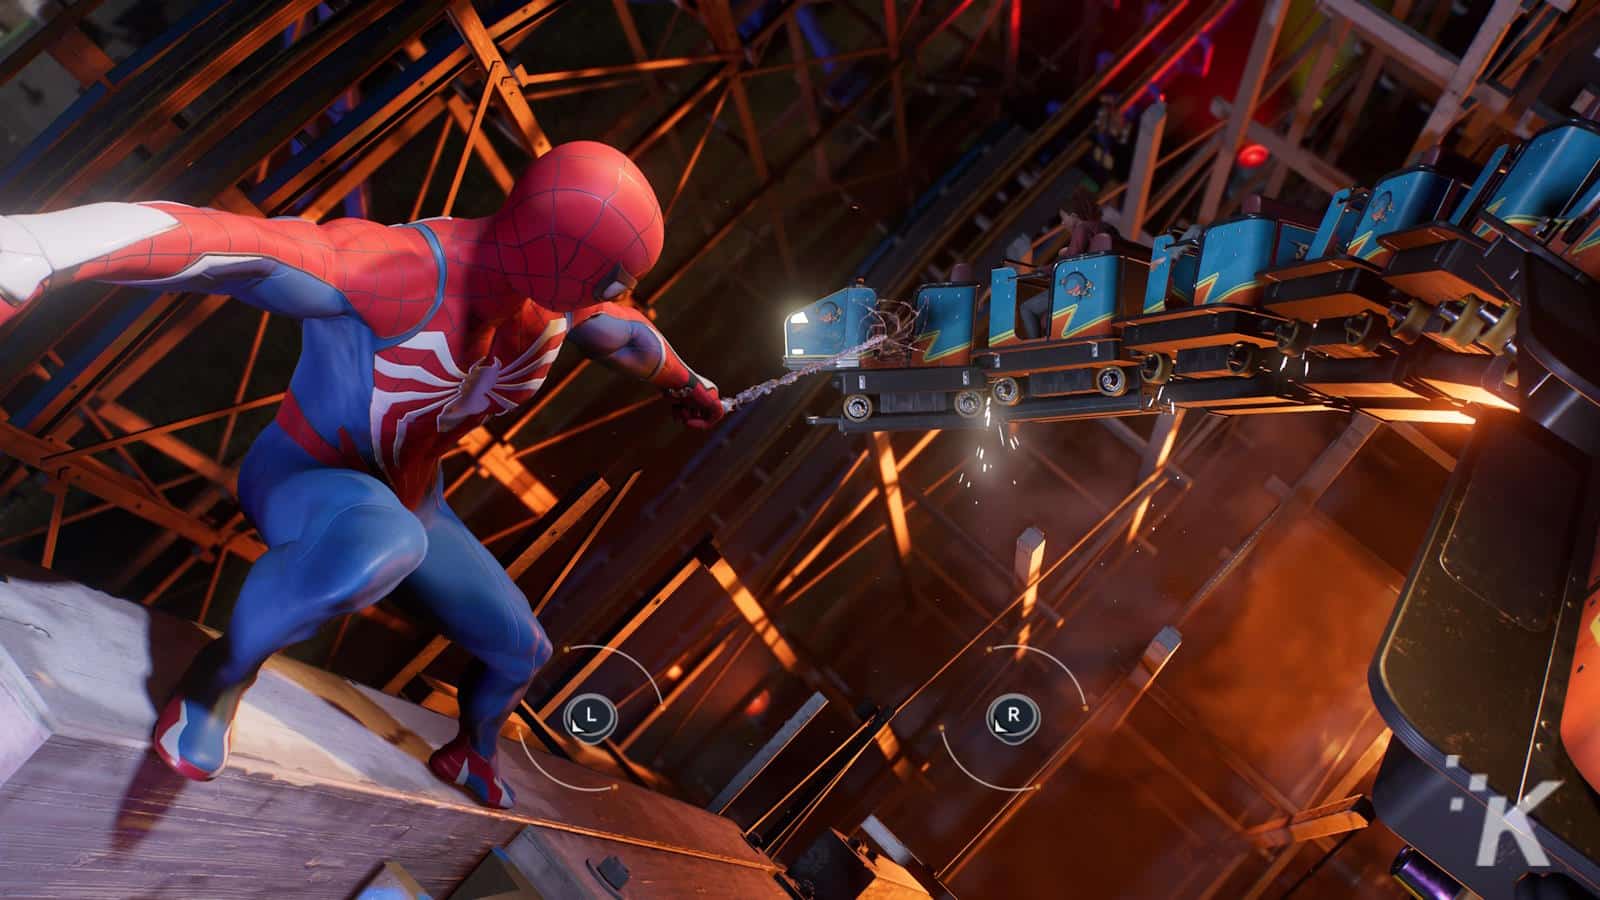 Spider-man in his classic red and blue costume is using his web to interact with a mechanical device amidst a complex network of girders, with on-screen prompts indicating gameplay controls.